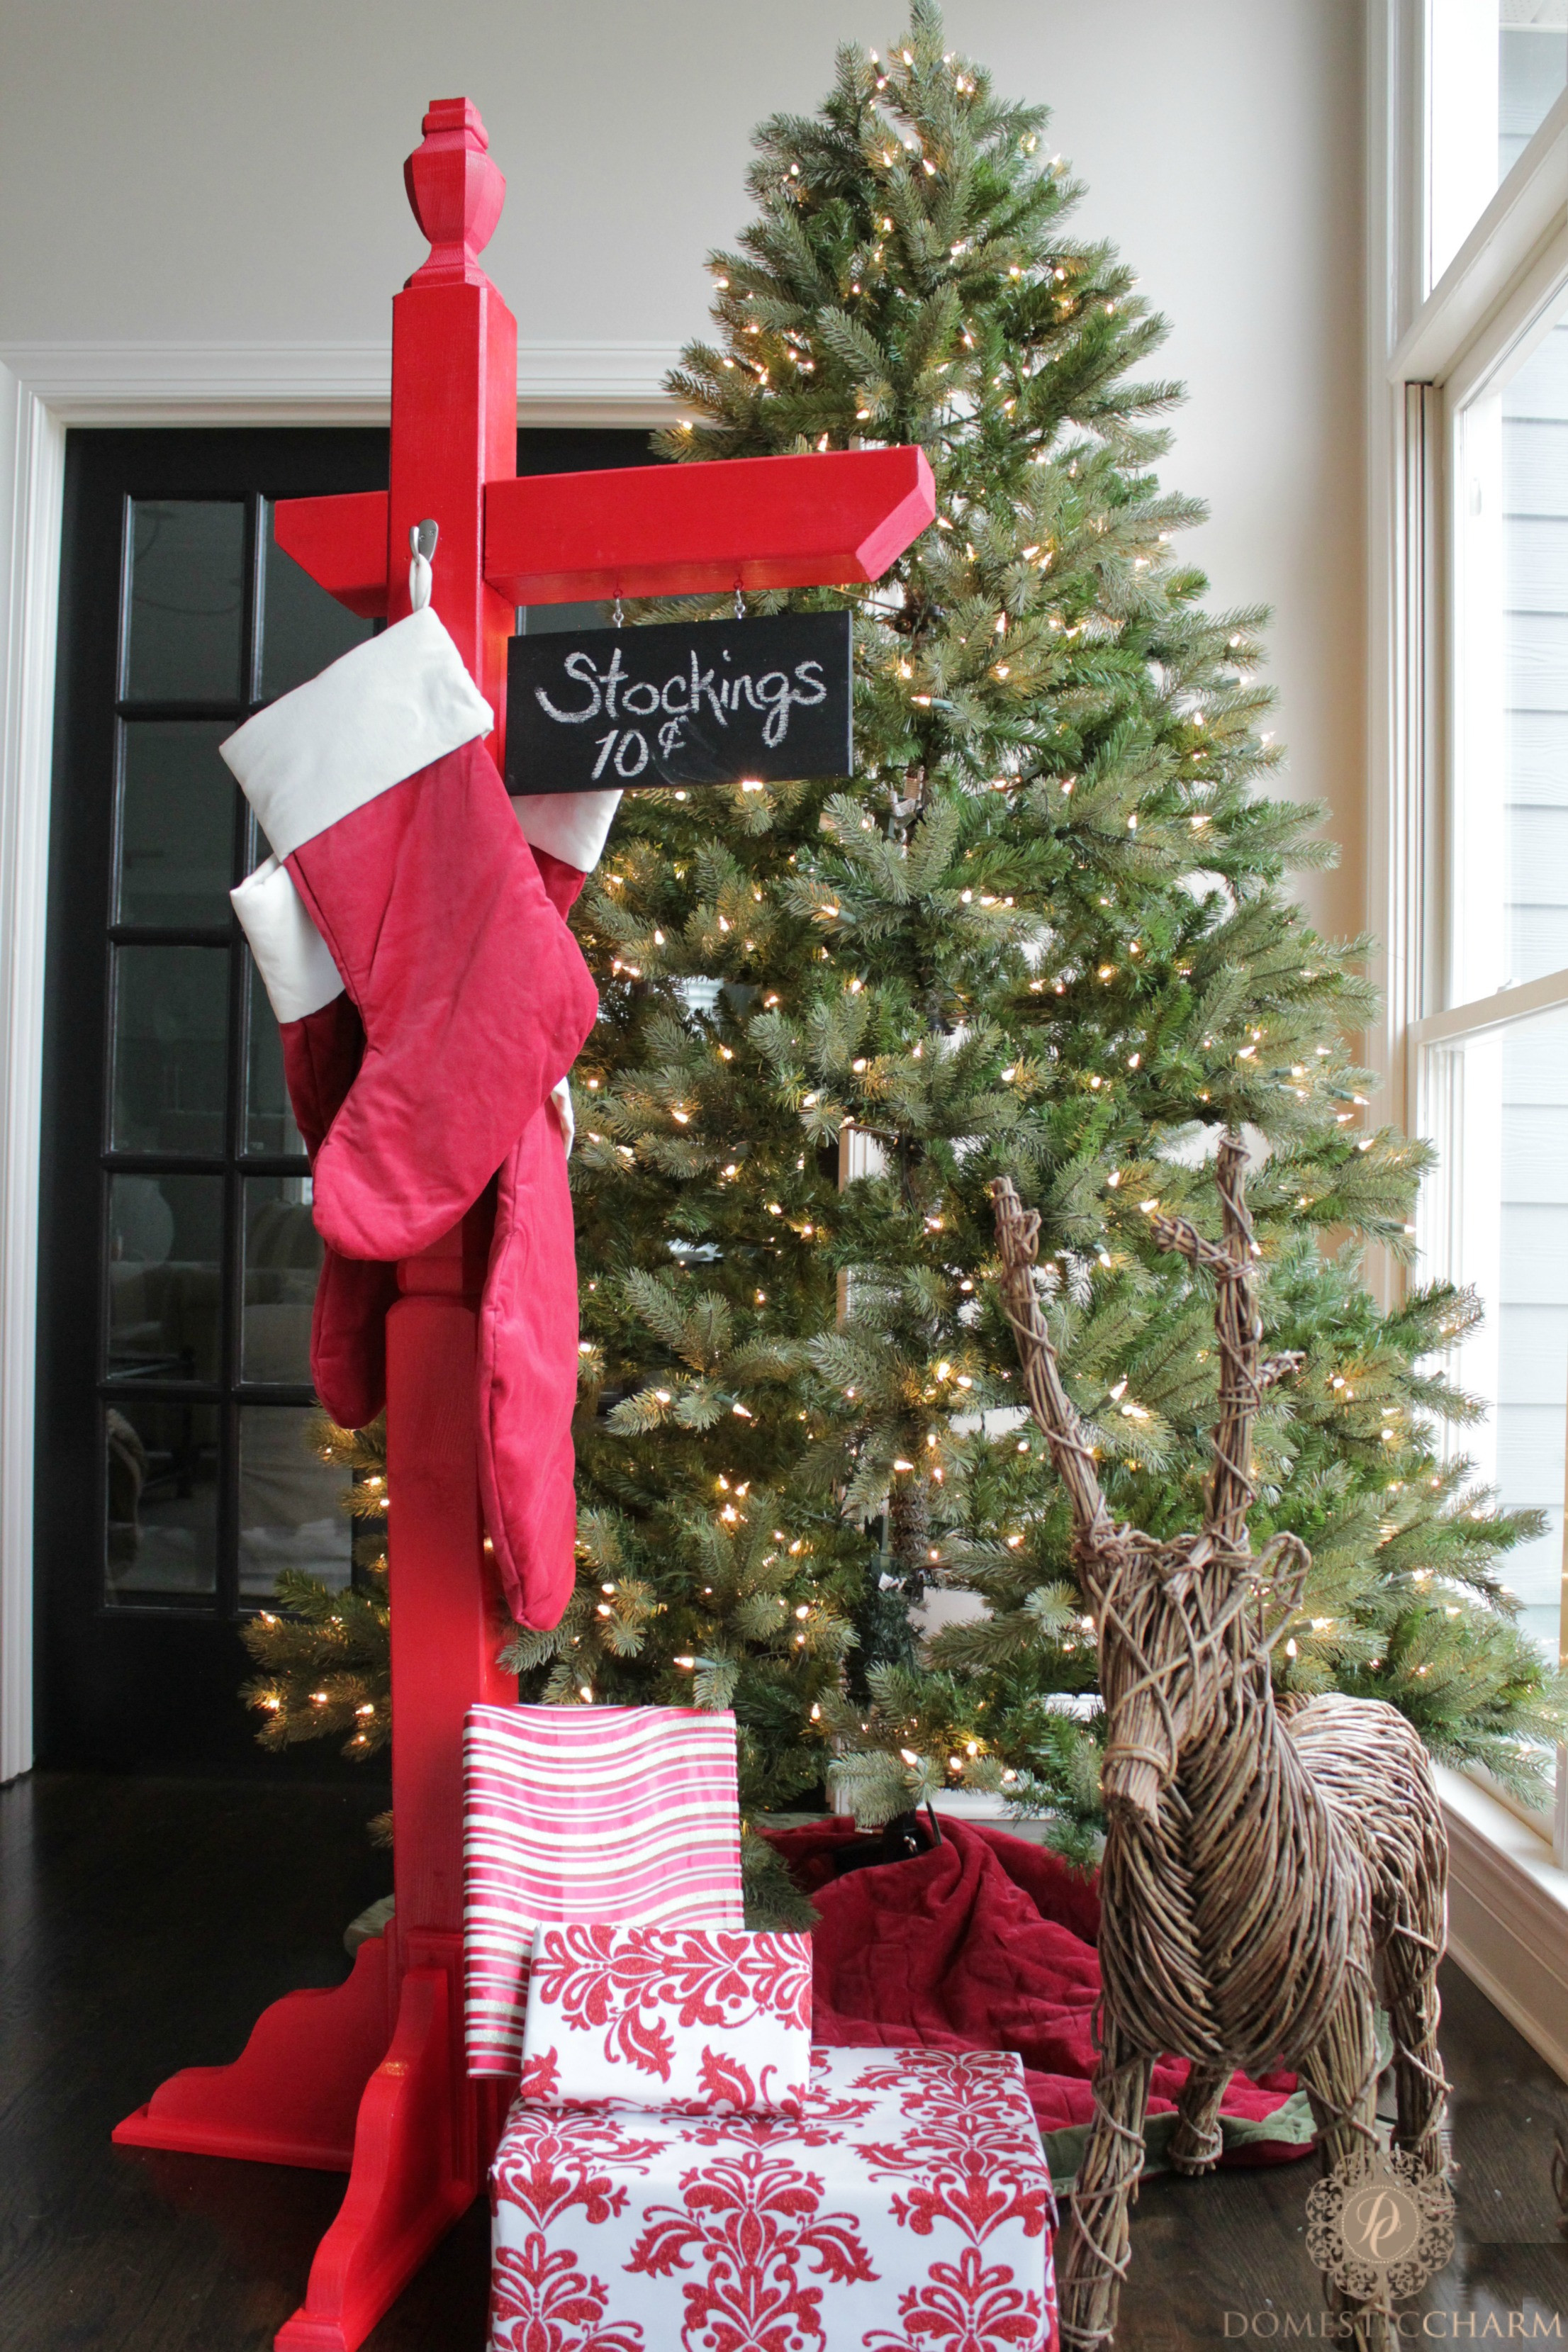 Christmas Stocking Floor Stand
 DIY Stocking Holder with The Home Depot Domestic Charm